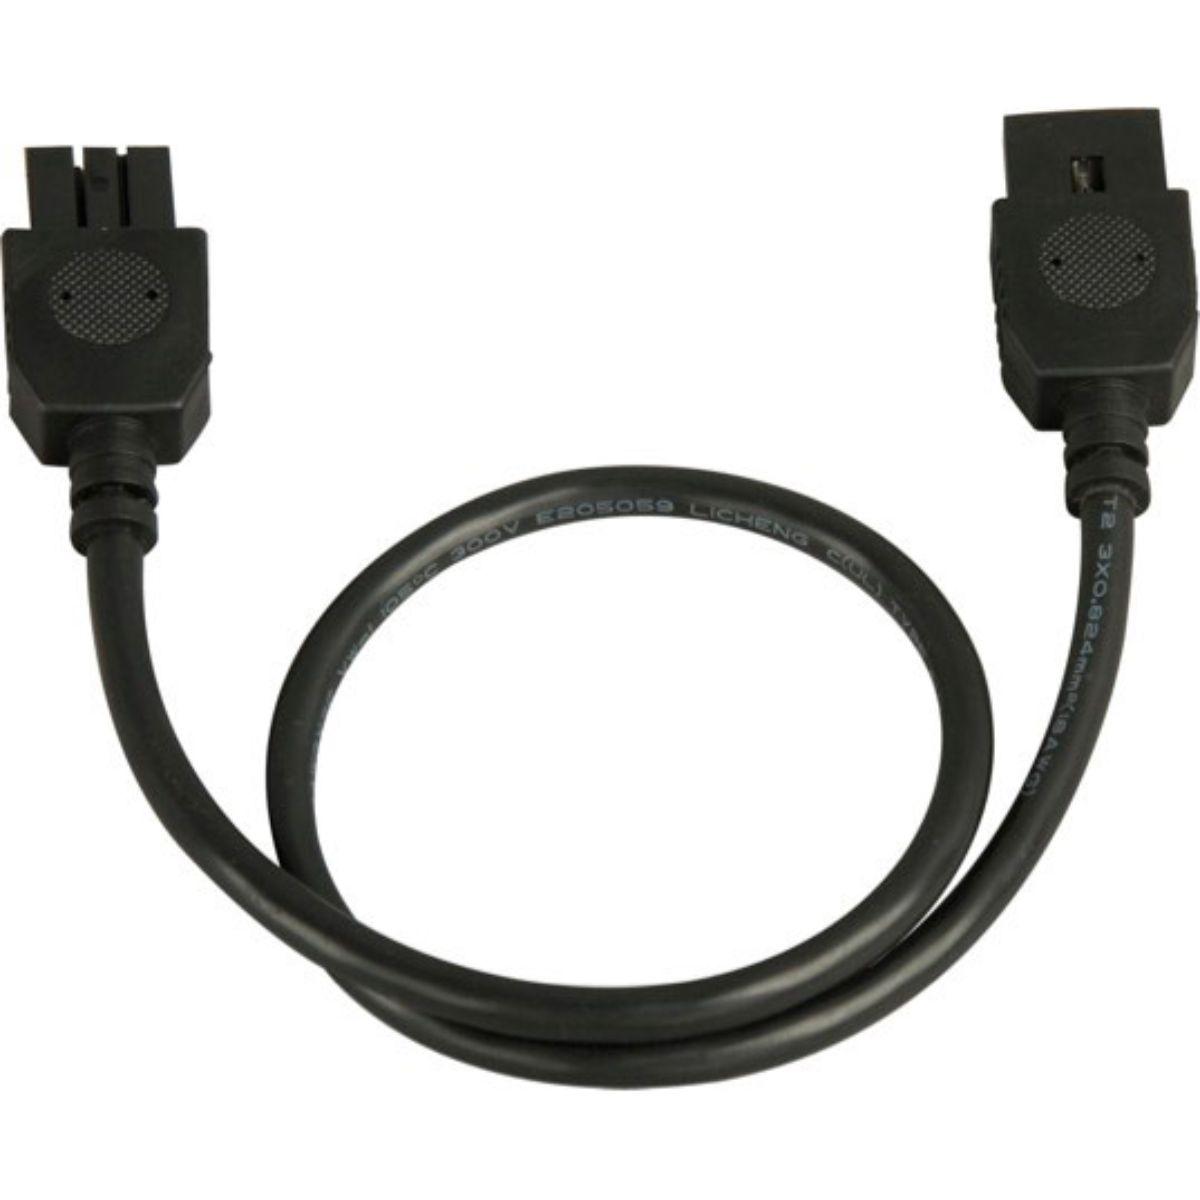 CounterMax 24in. Connecting Cord, Black - Bees Lighting